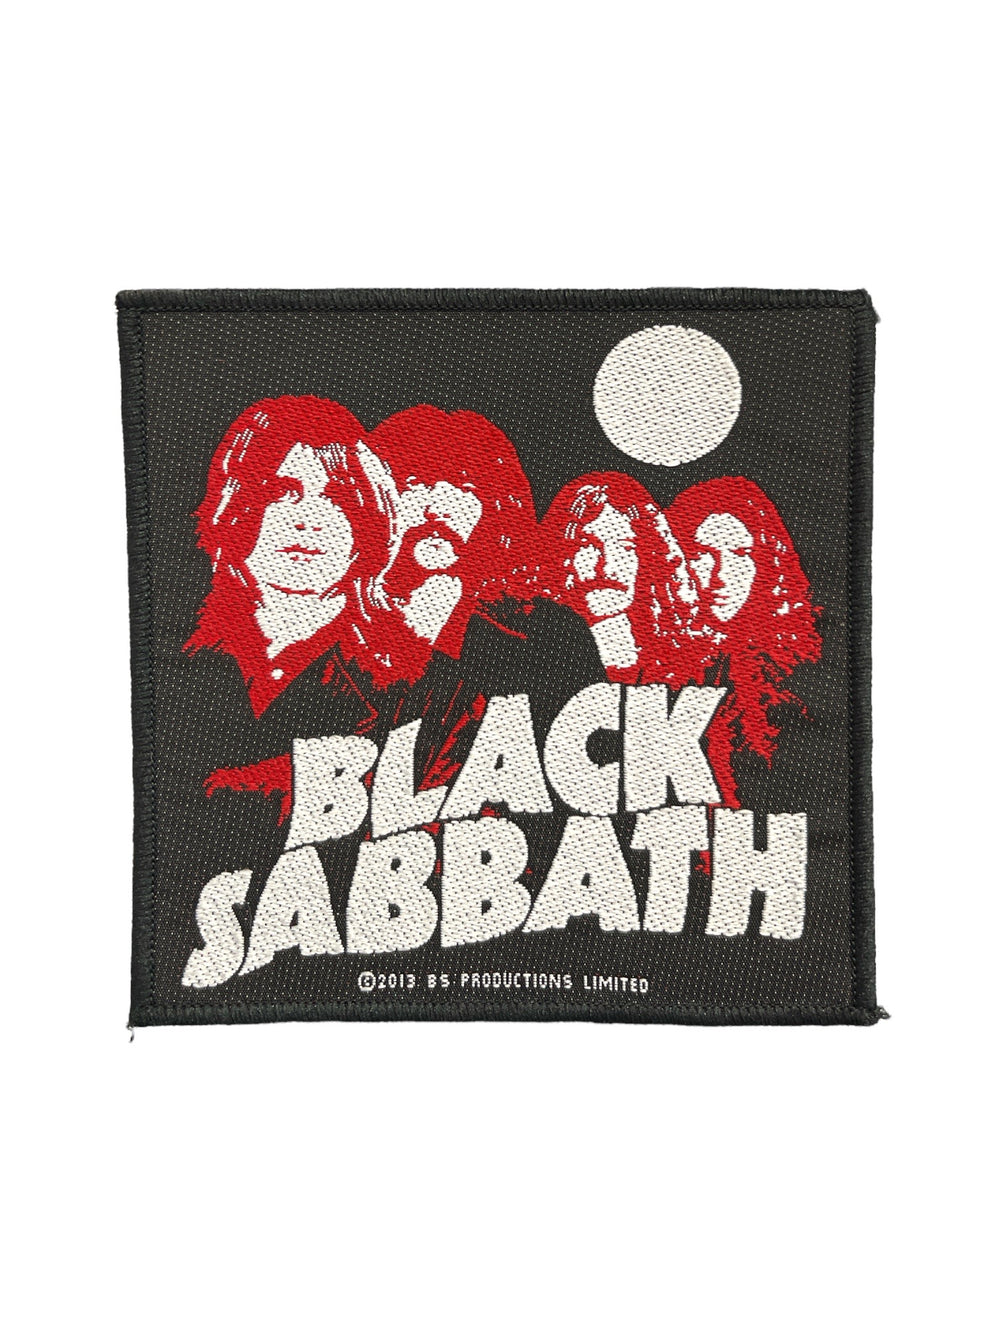 Black sabbath Red Faces Official Woven Patch Brand New